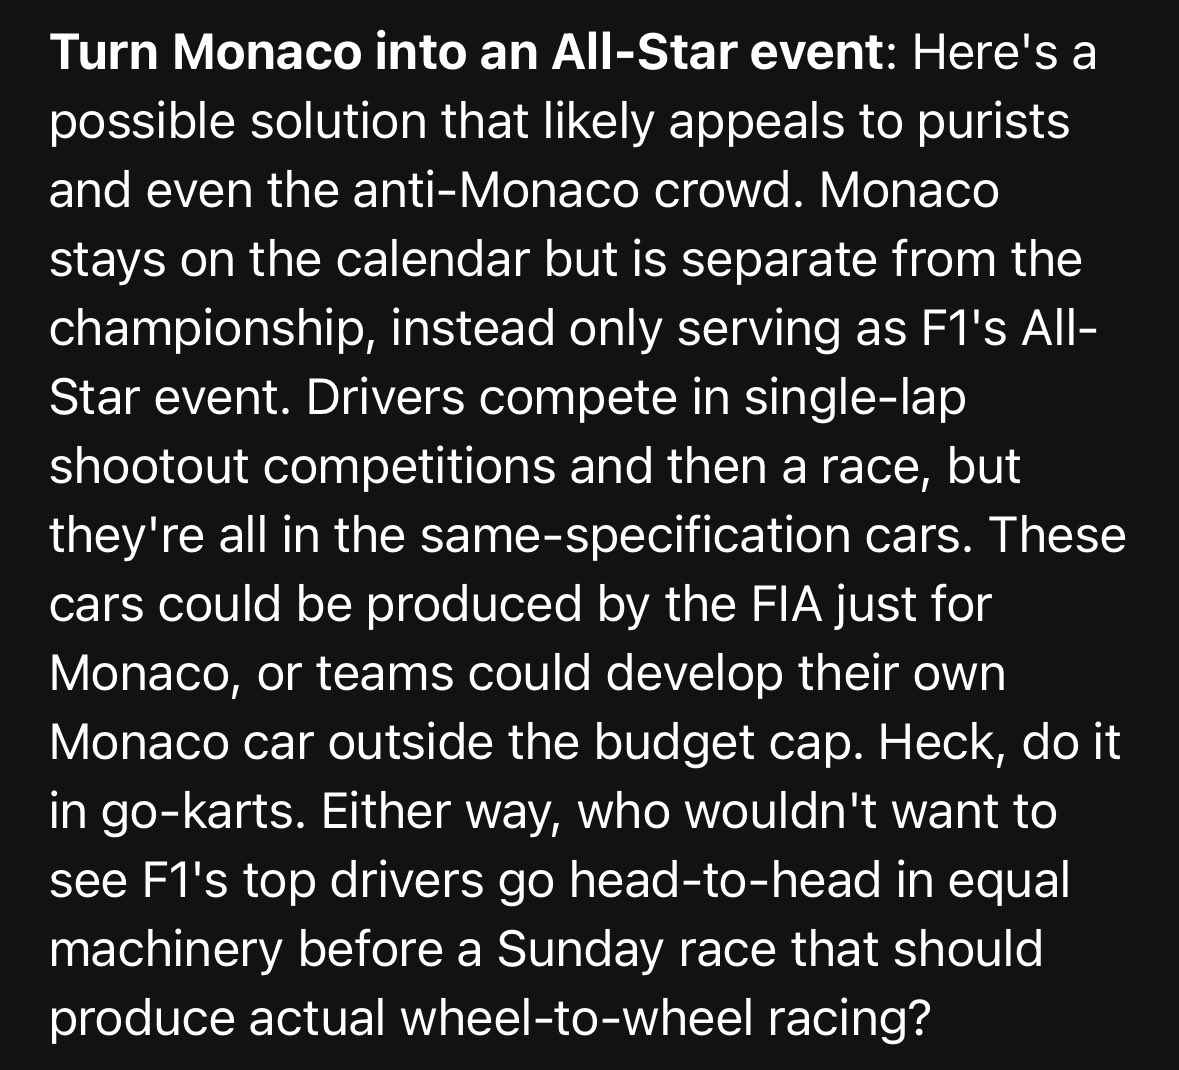 ICYMI: Pitched ideas on how to try improving the Monaco race but if nothing works, why not just turn the spectacle into F1’s All Star Game with smaller cars? It stays on the calendar & can be separate from the championship. You can boo me if you hate it. thescore.com/formula1/news/…